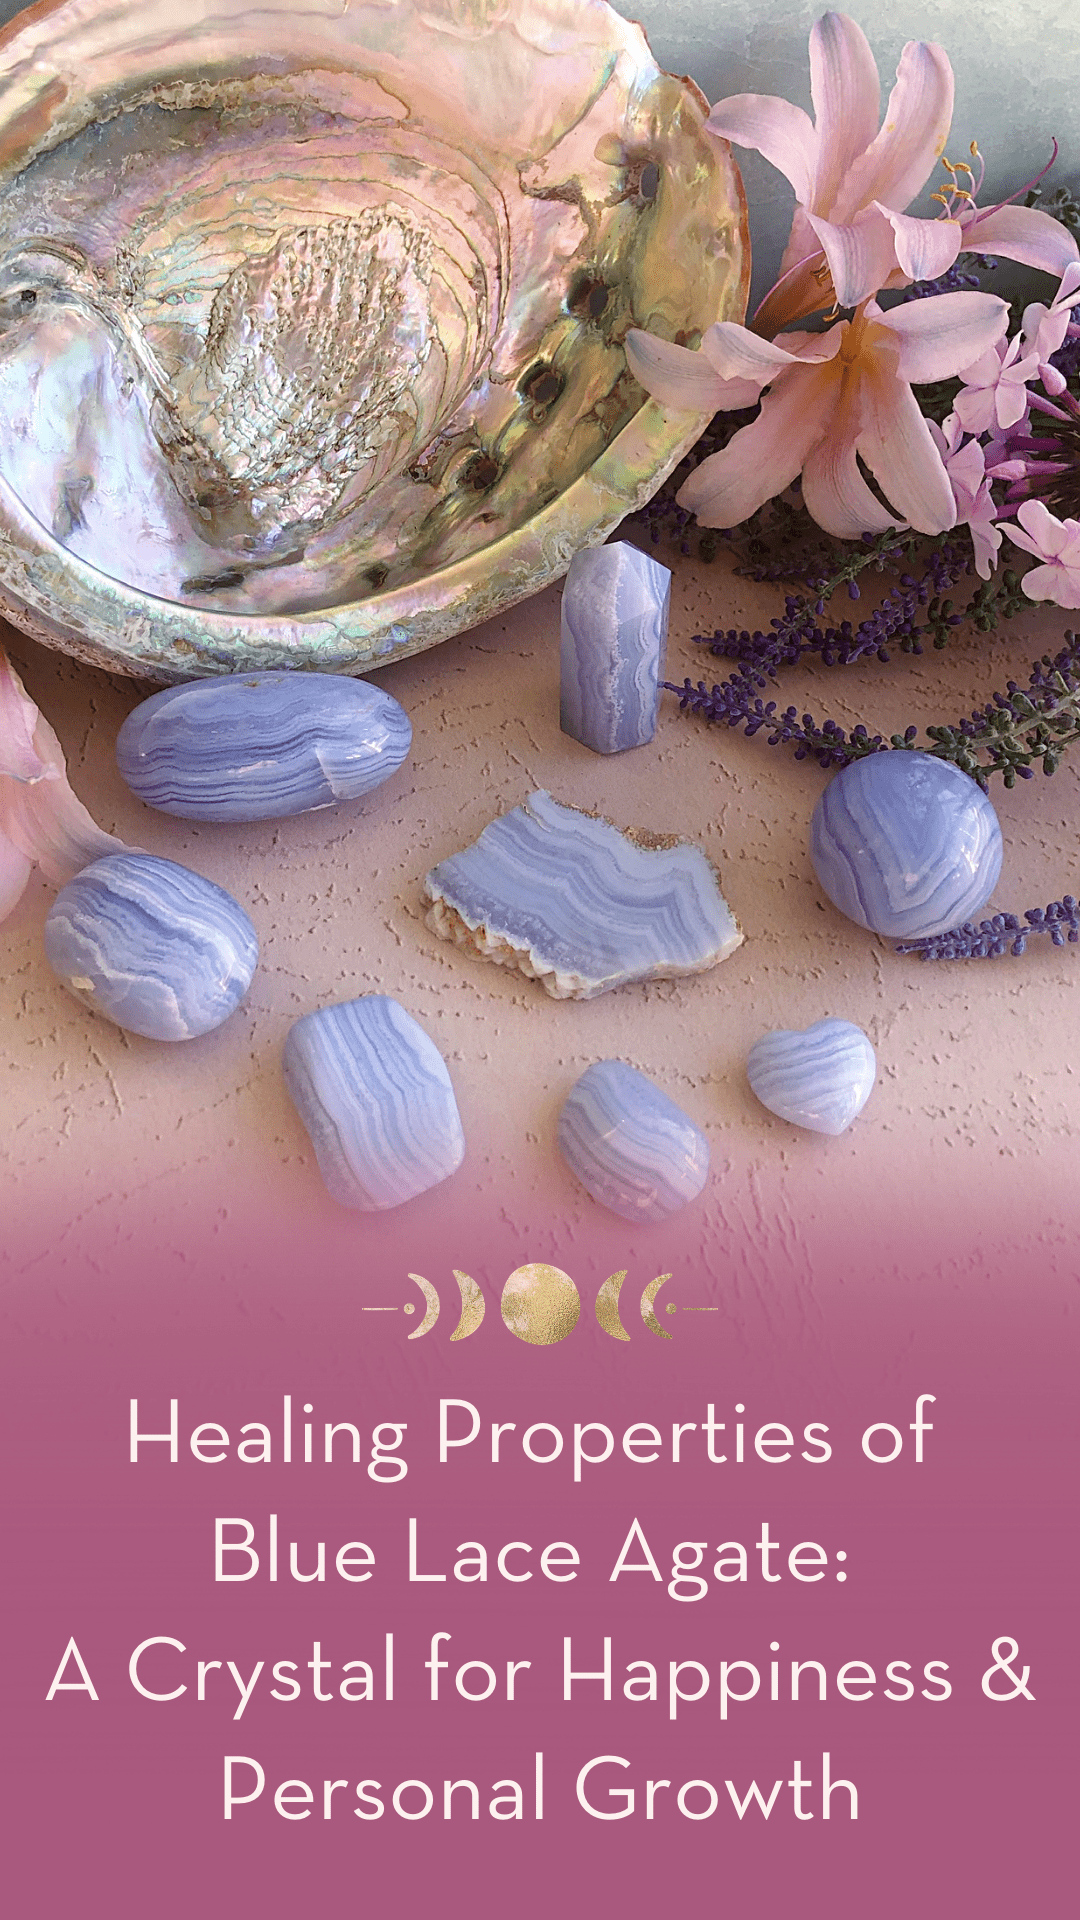 Healing Properties of Blue Lace Agate